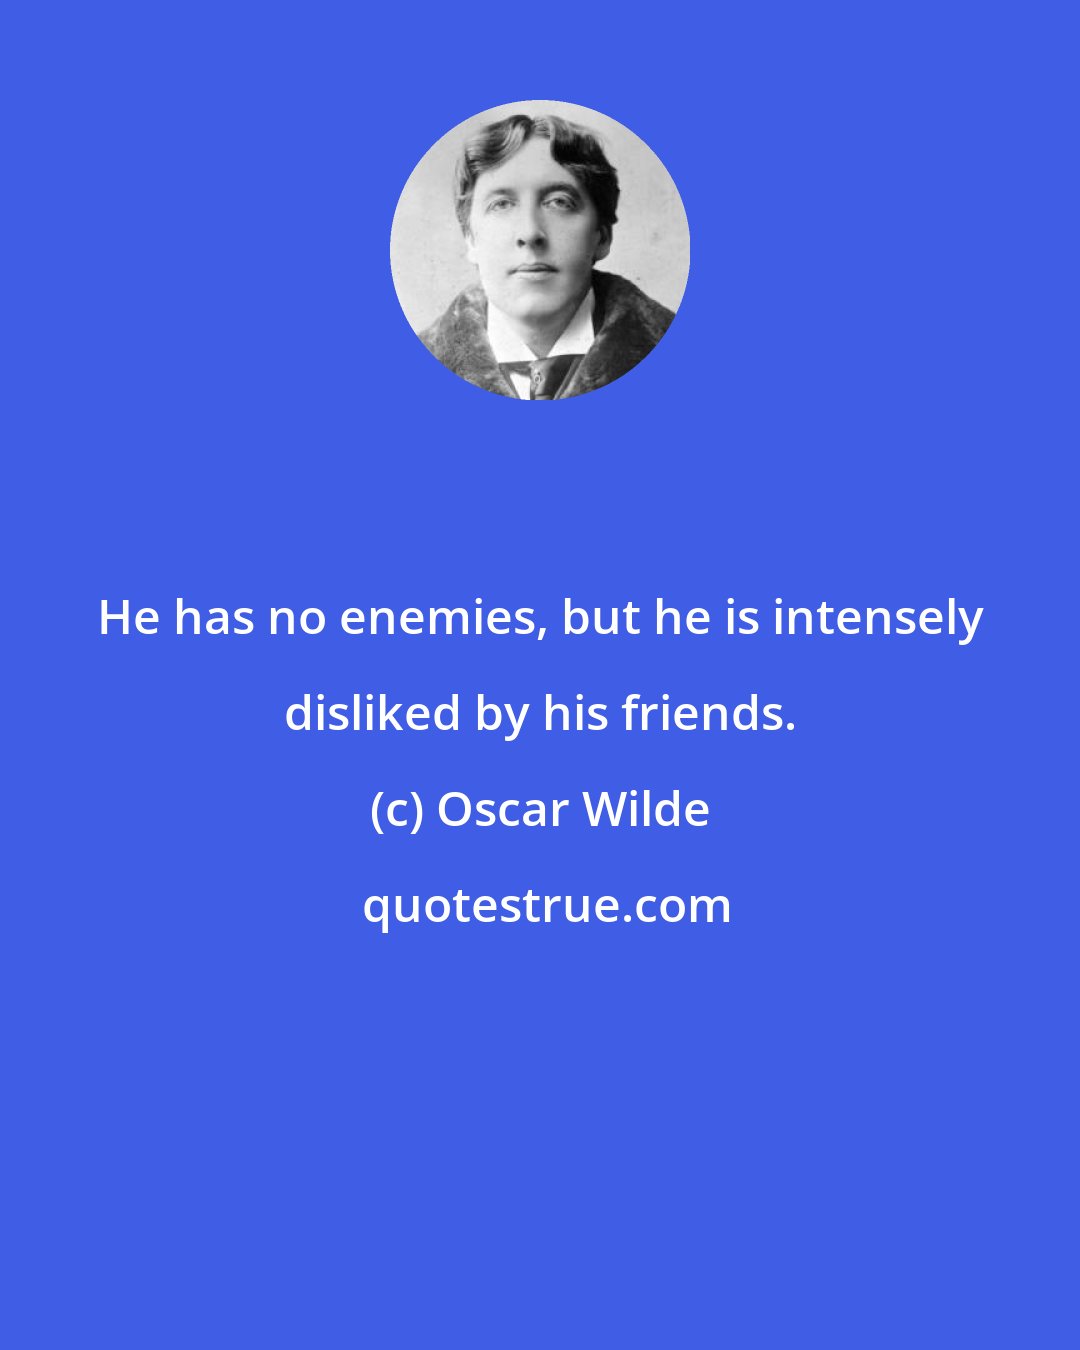 Oscar Wilde: He has no enemies, but he is intensely disliked by his friends.